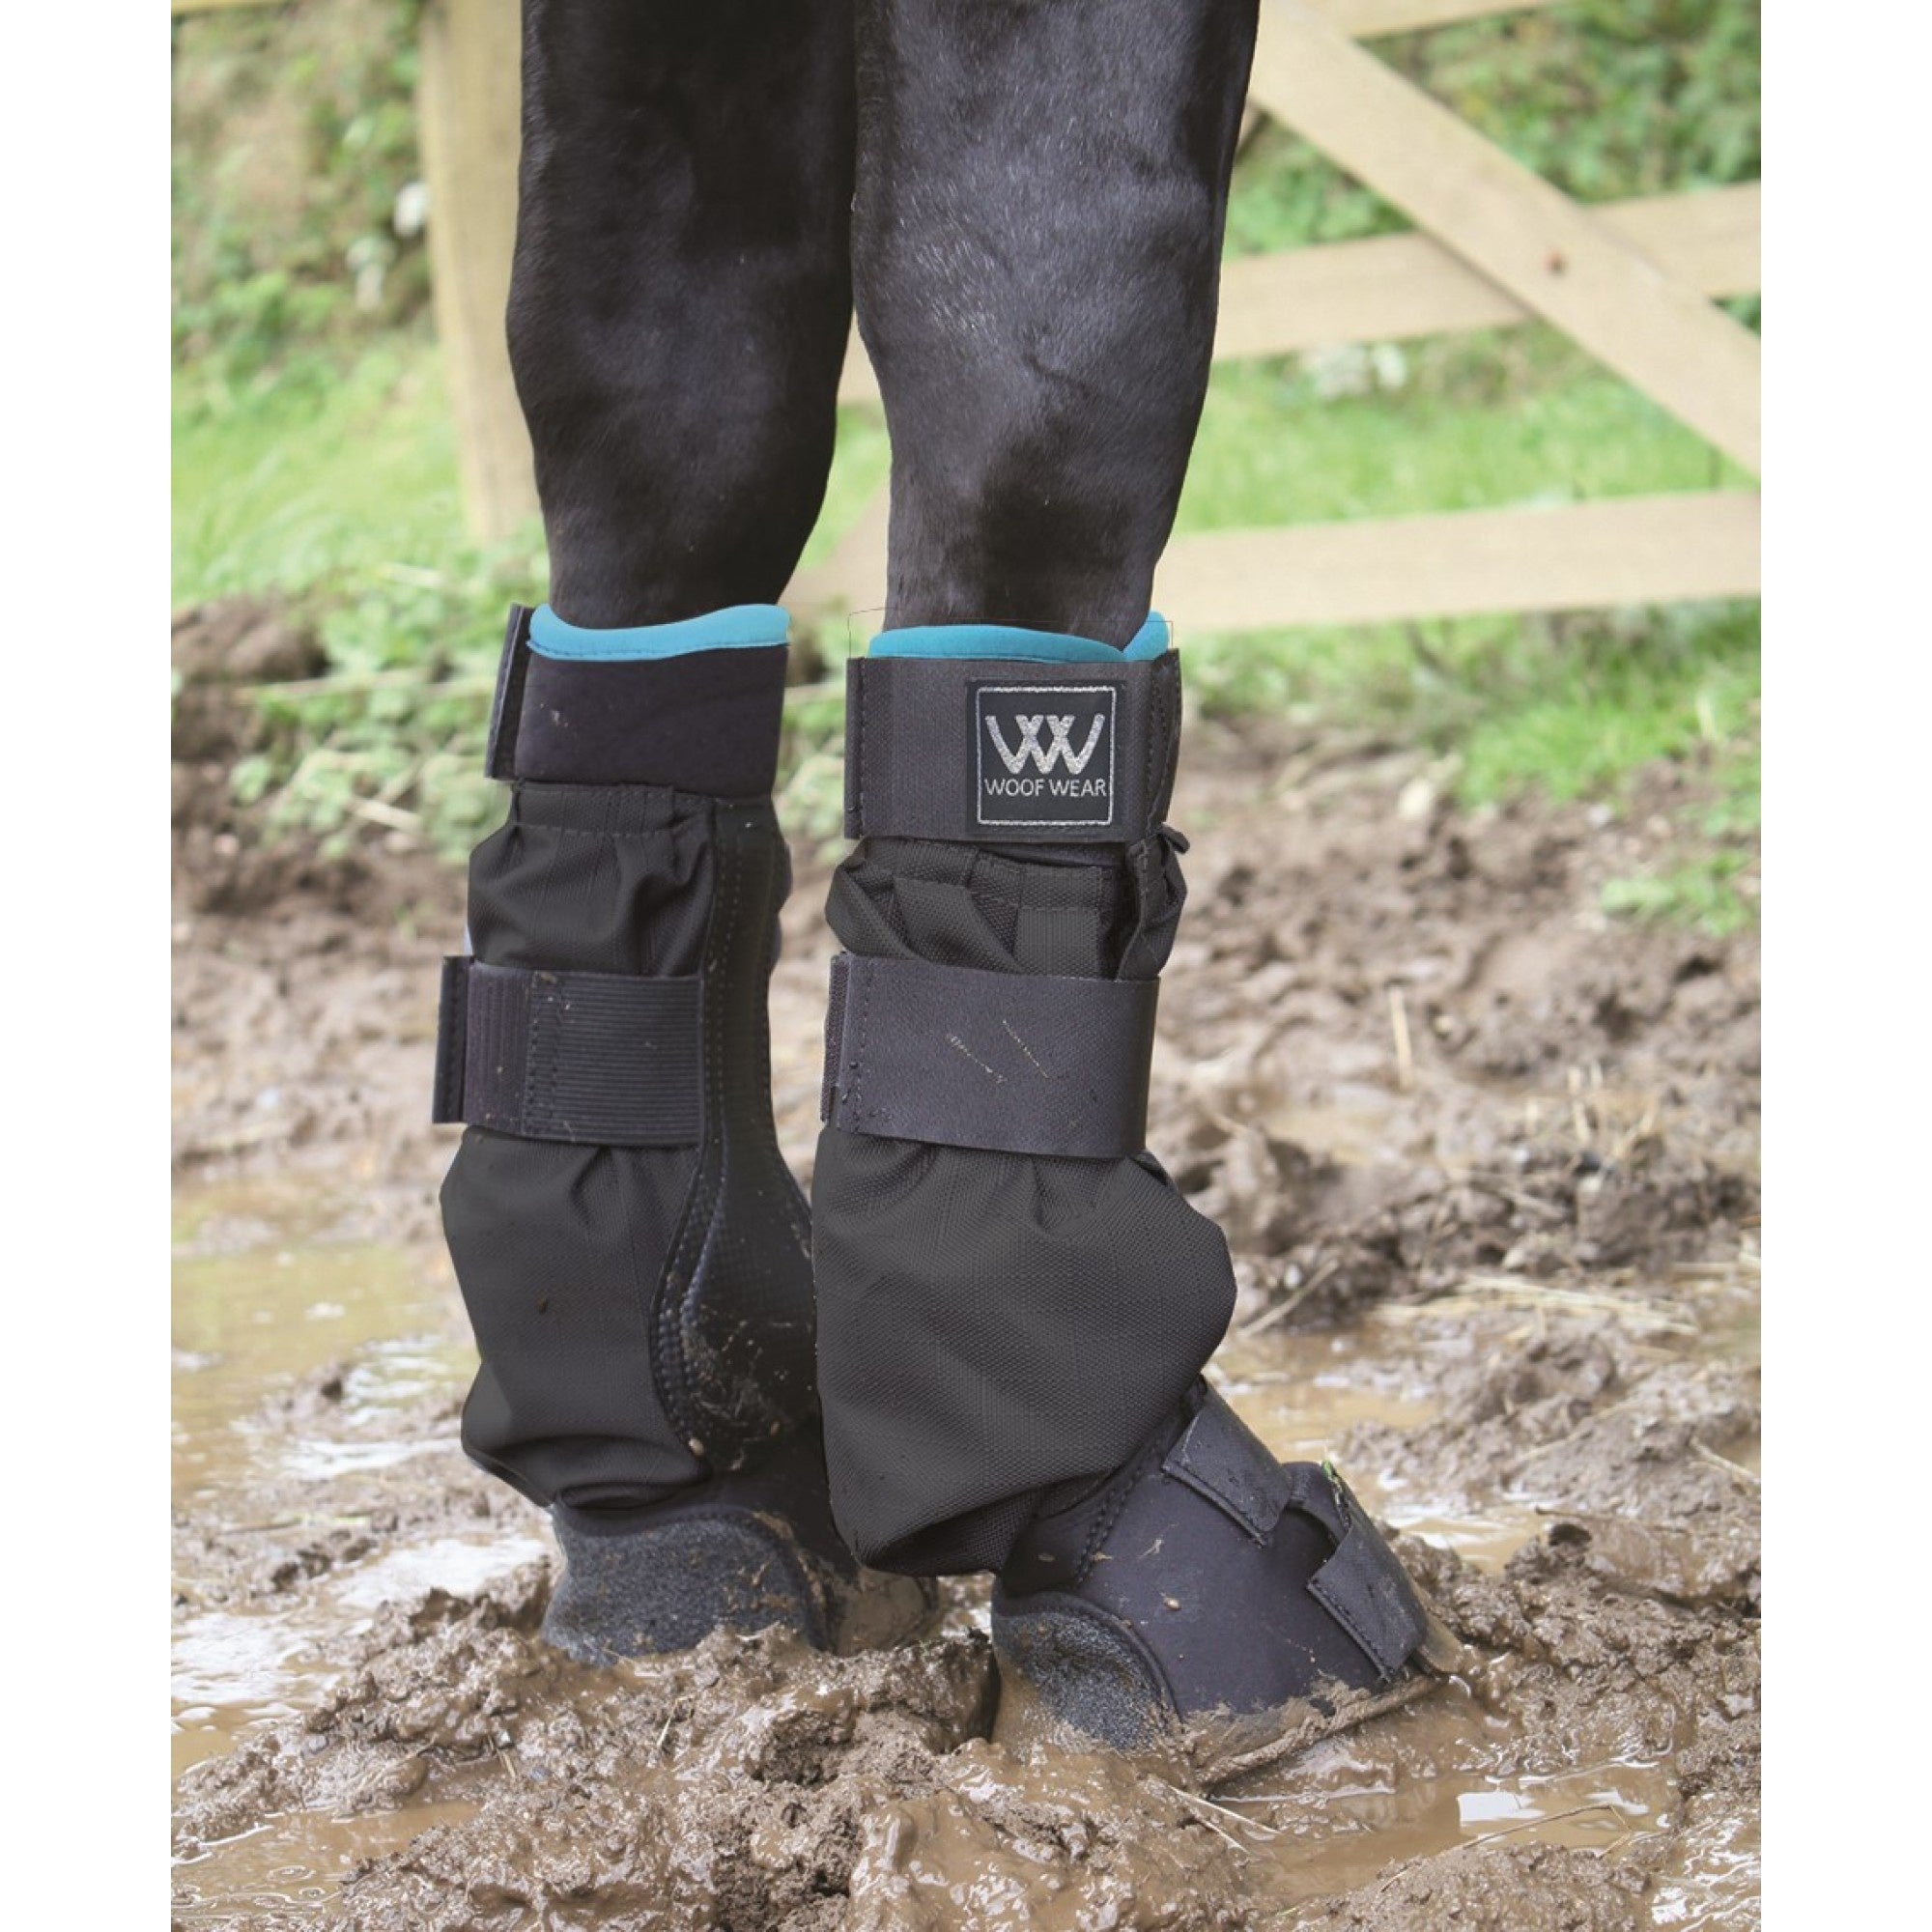 Woof Wear Mud Fever Turnout Boot - Summerside Tack and Equestrian Wear